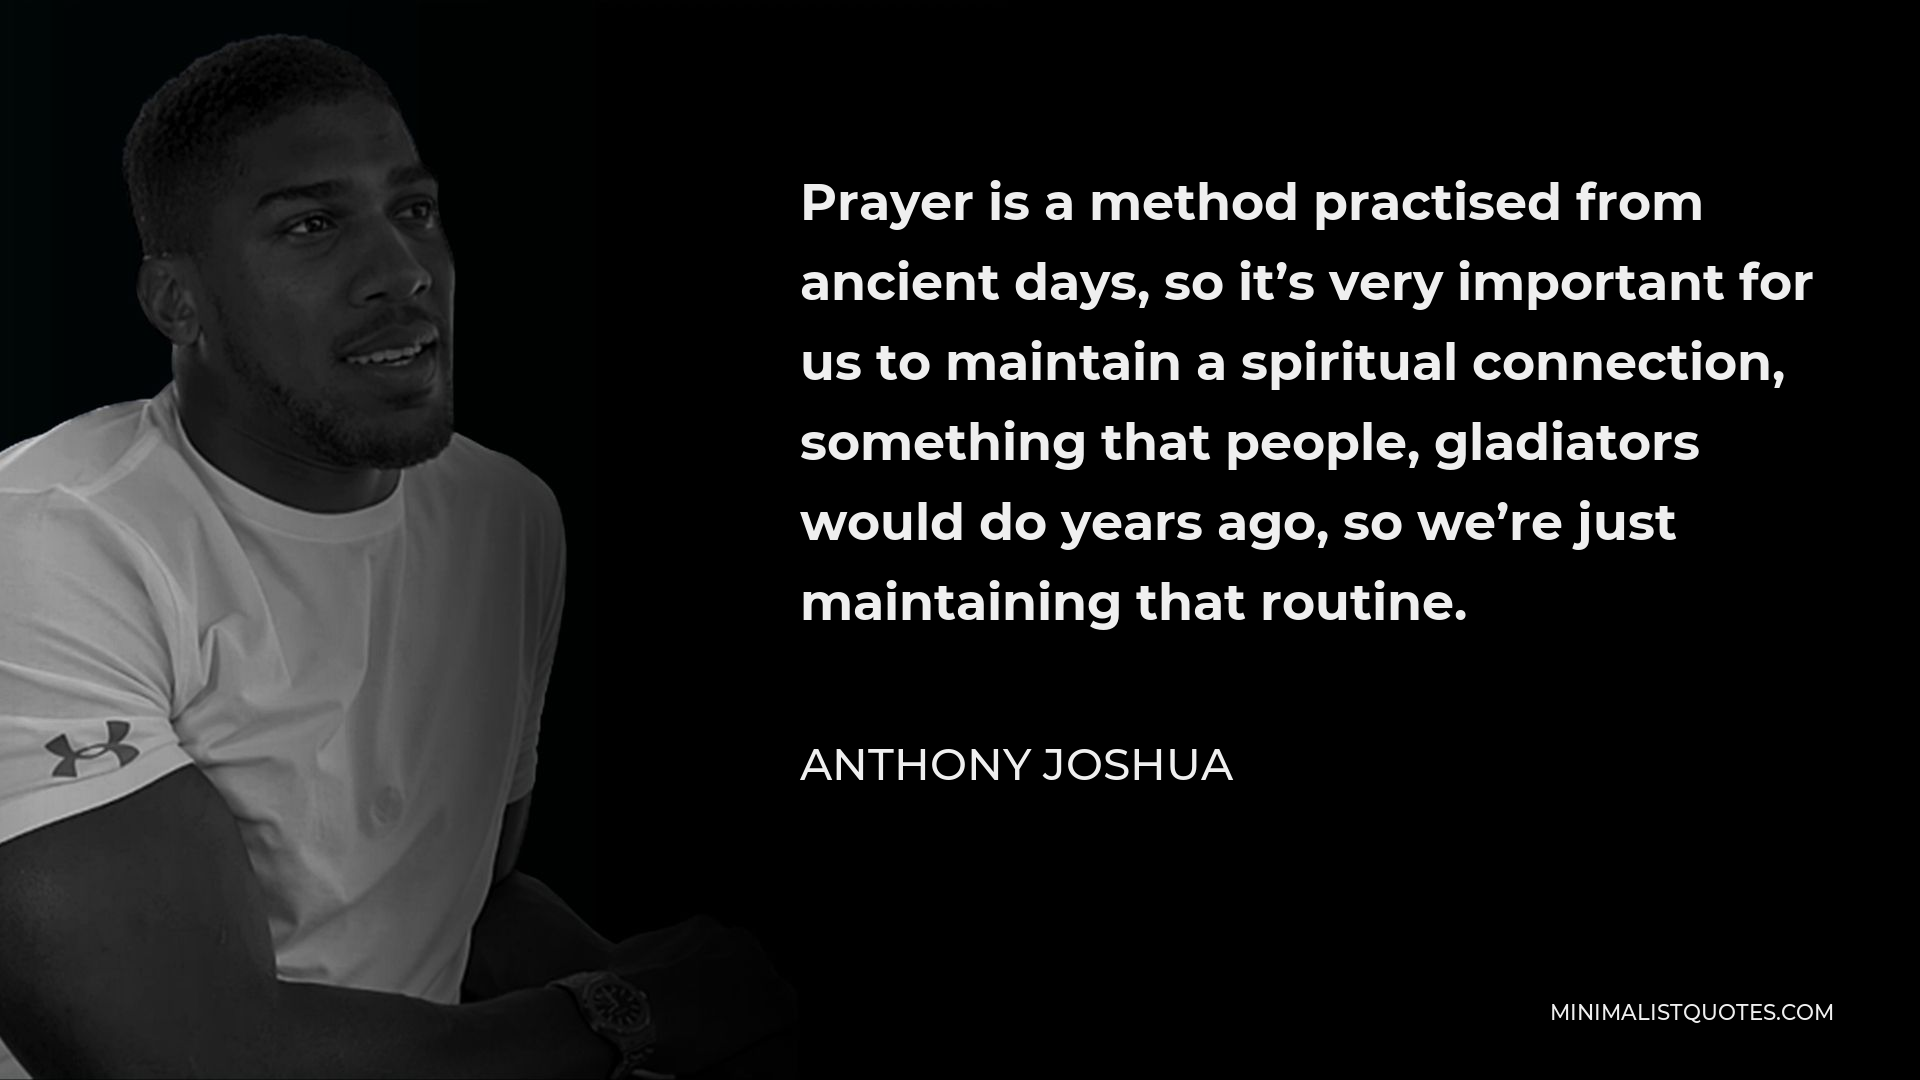 Anthony Joshua Quote - Prayer is a method practised from ancient days, so it’s very important for us to maintain a spiritual connection, something that people, gladiators would do years ago, so we’re just maintaining that routine.